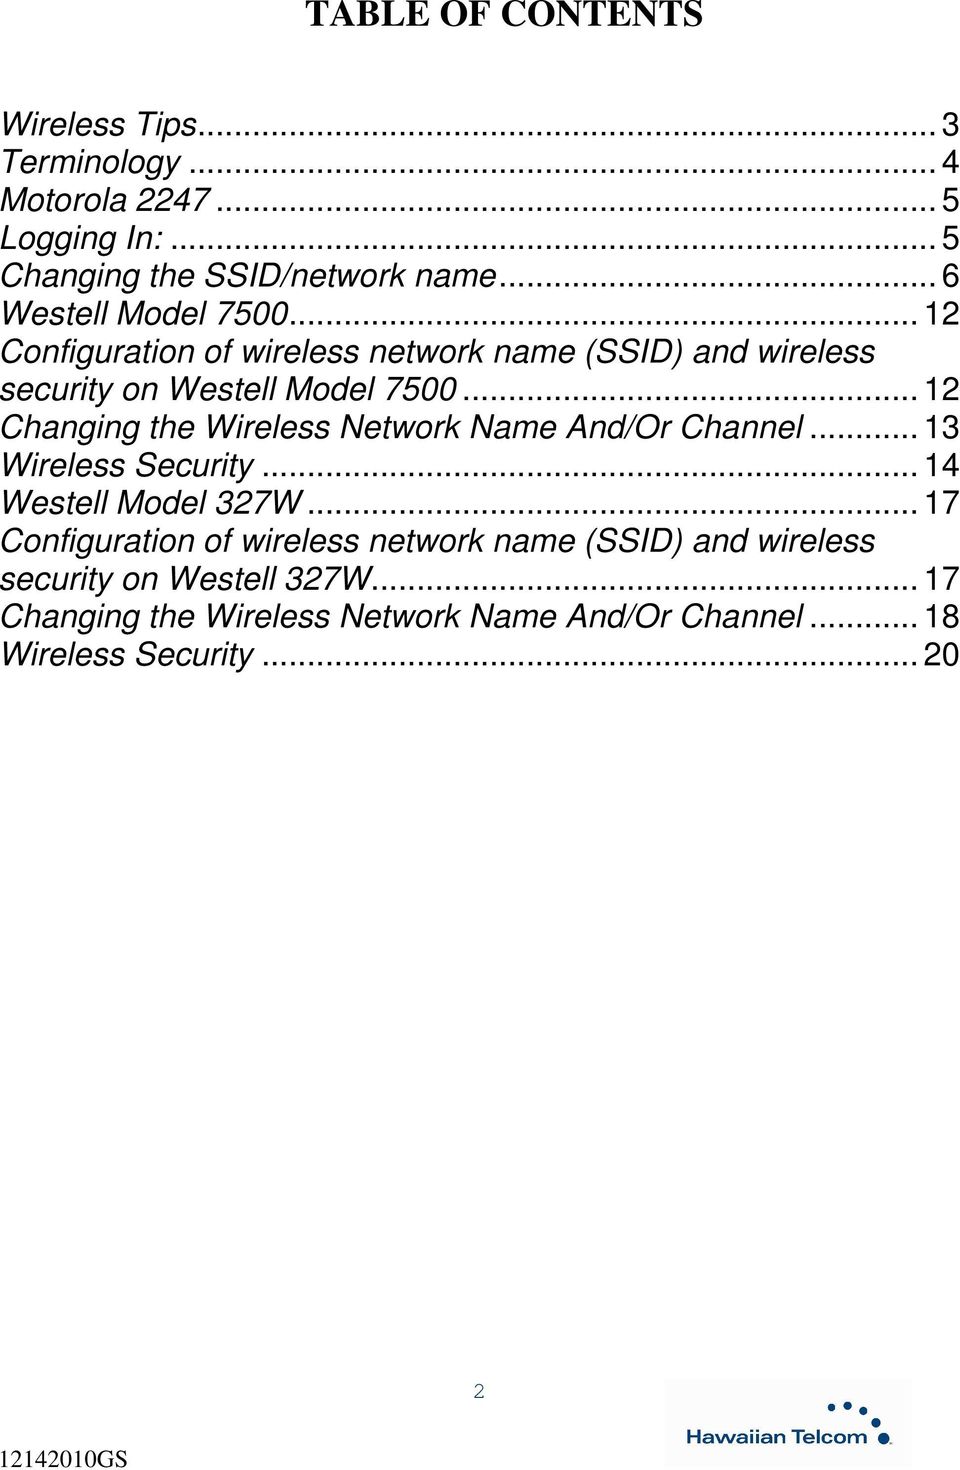 .. 12 Changing the Wireless Network Name And/Or Channel... 13 Wireless Security... 14 Westell Model 327W.